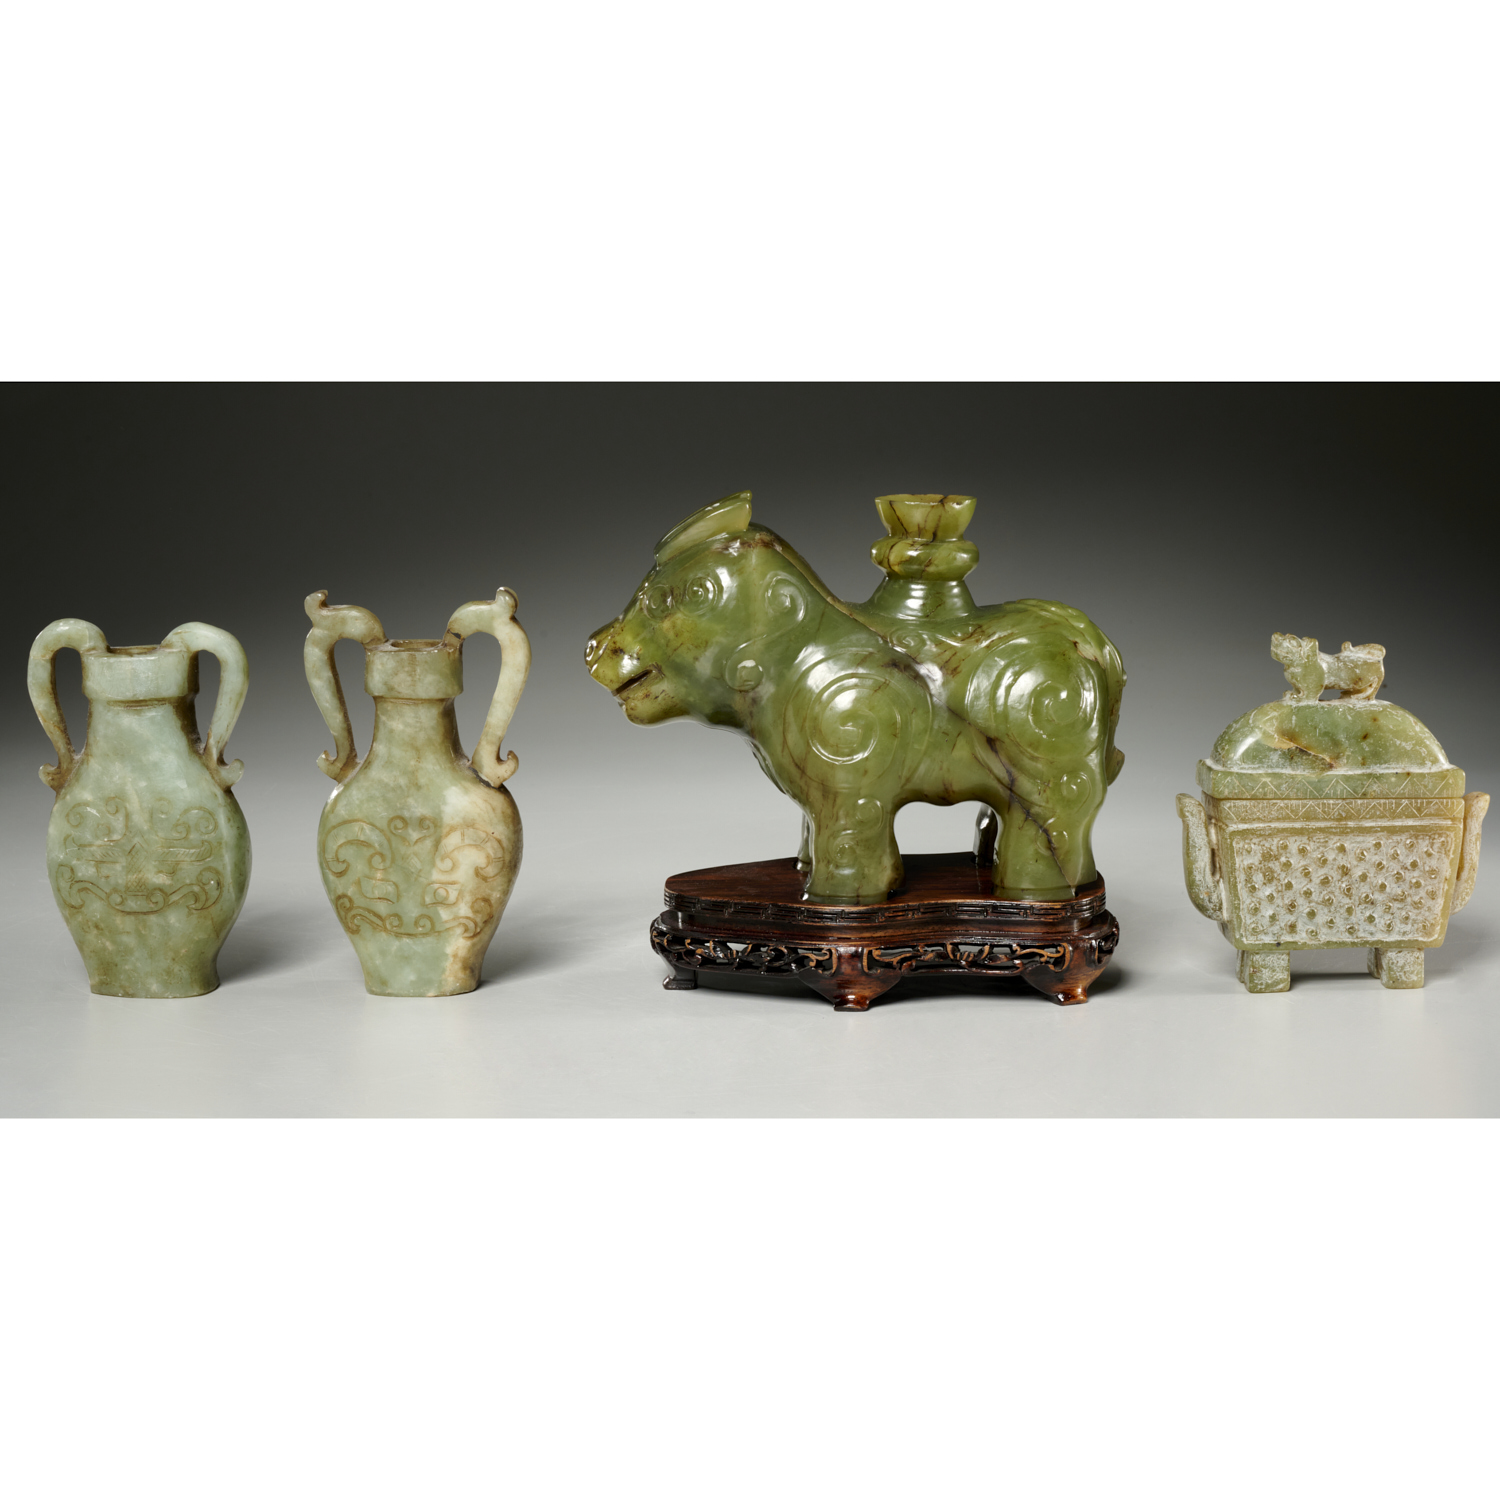 GROUP 4 CHINESE HARDSTONE CARVINGS 3611d0